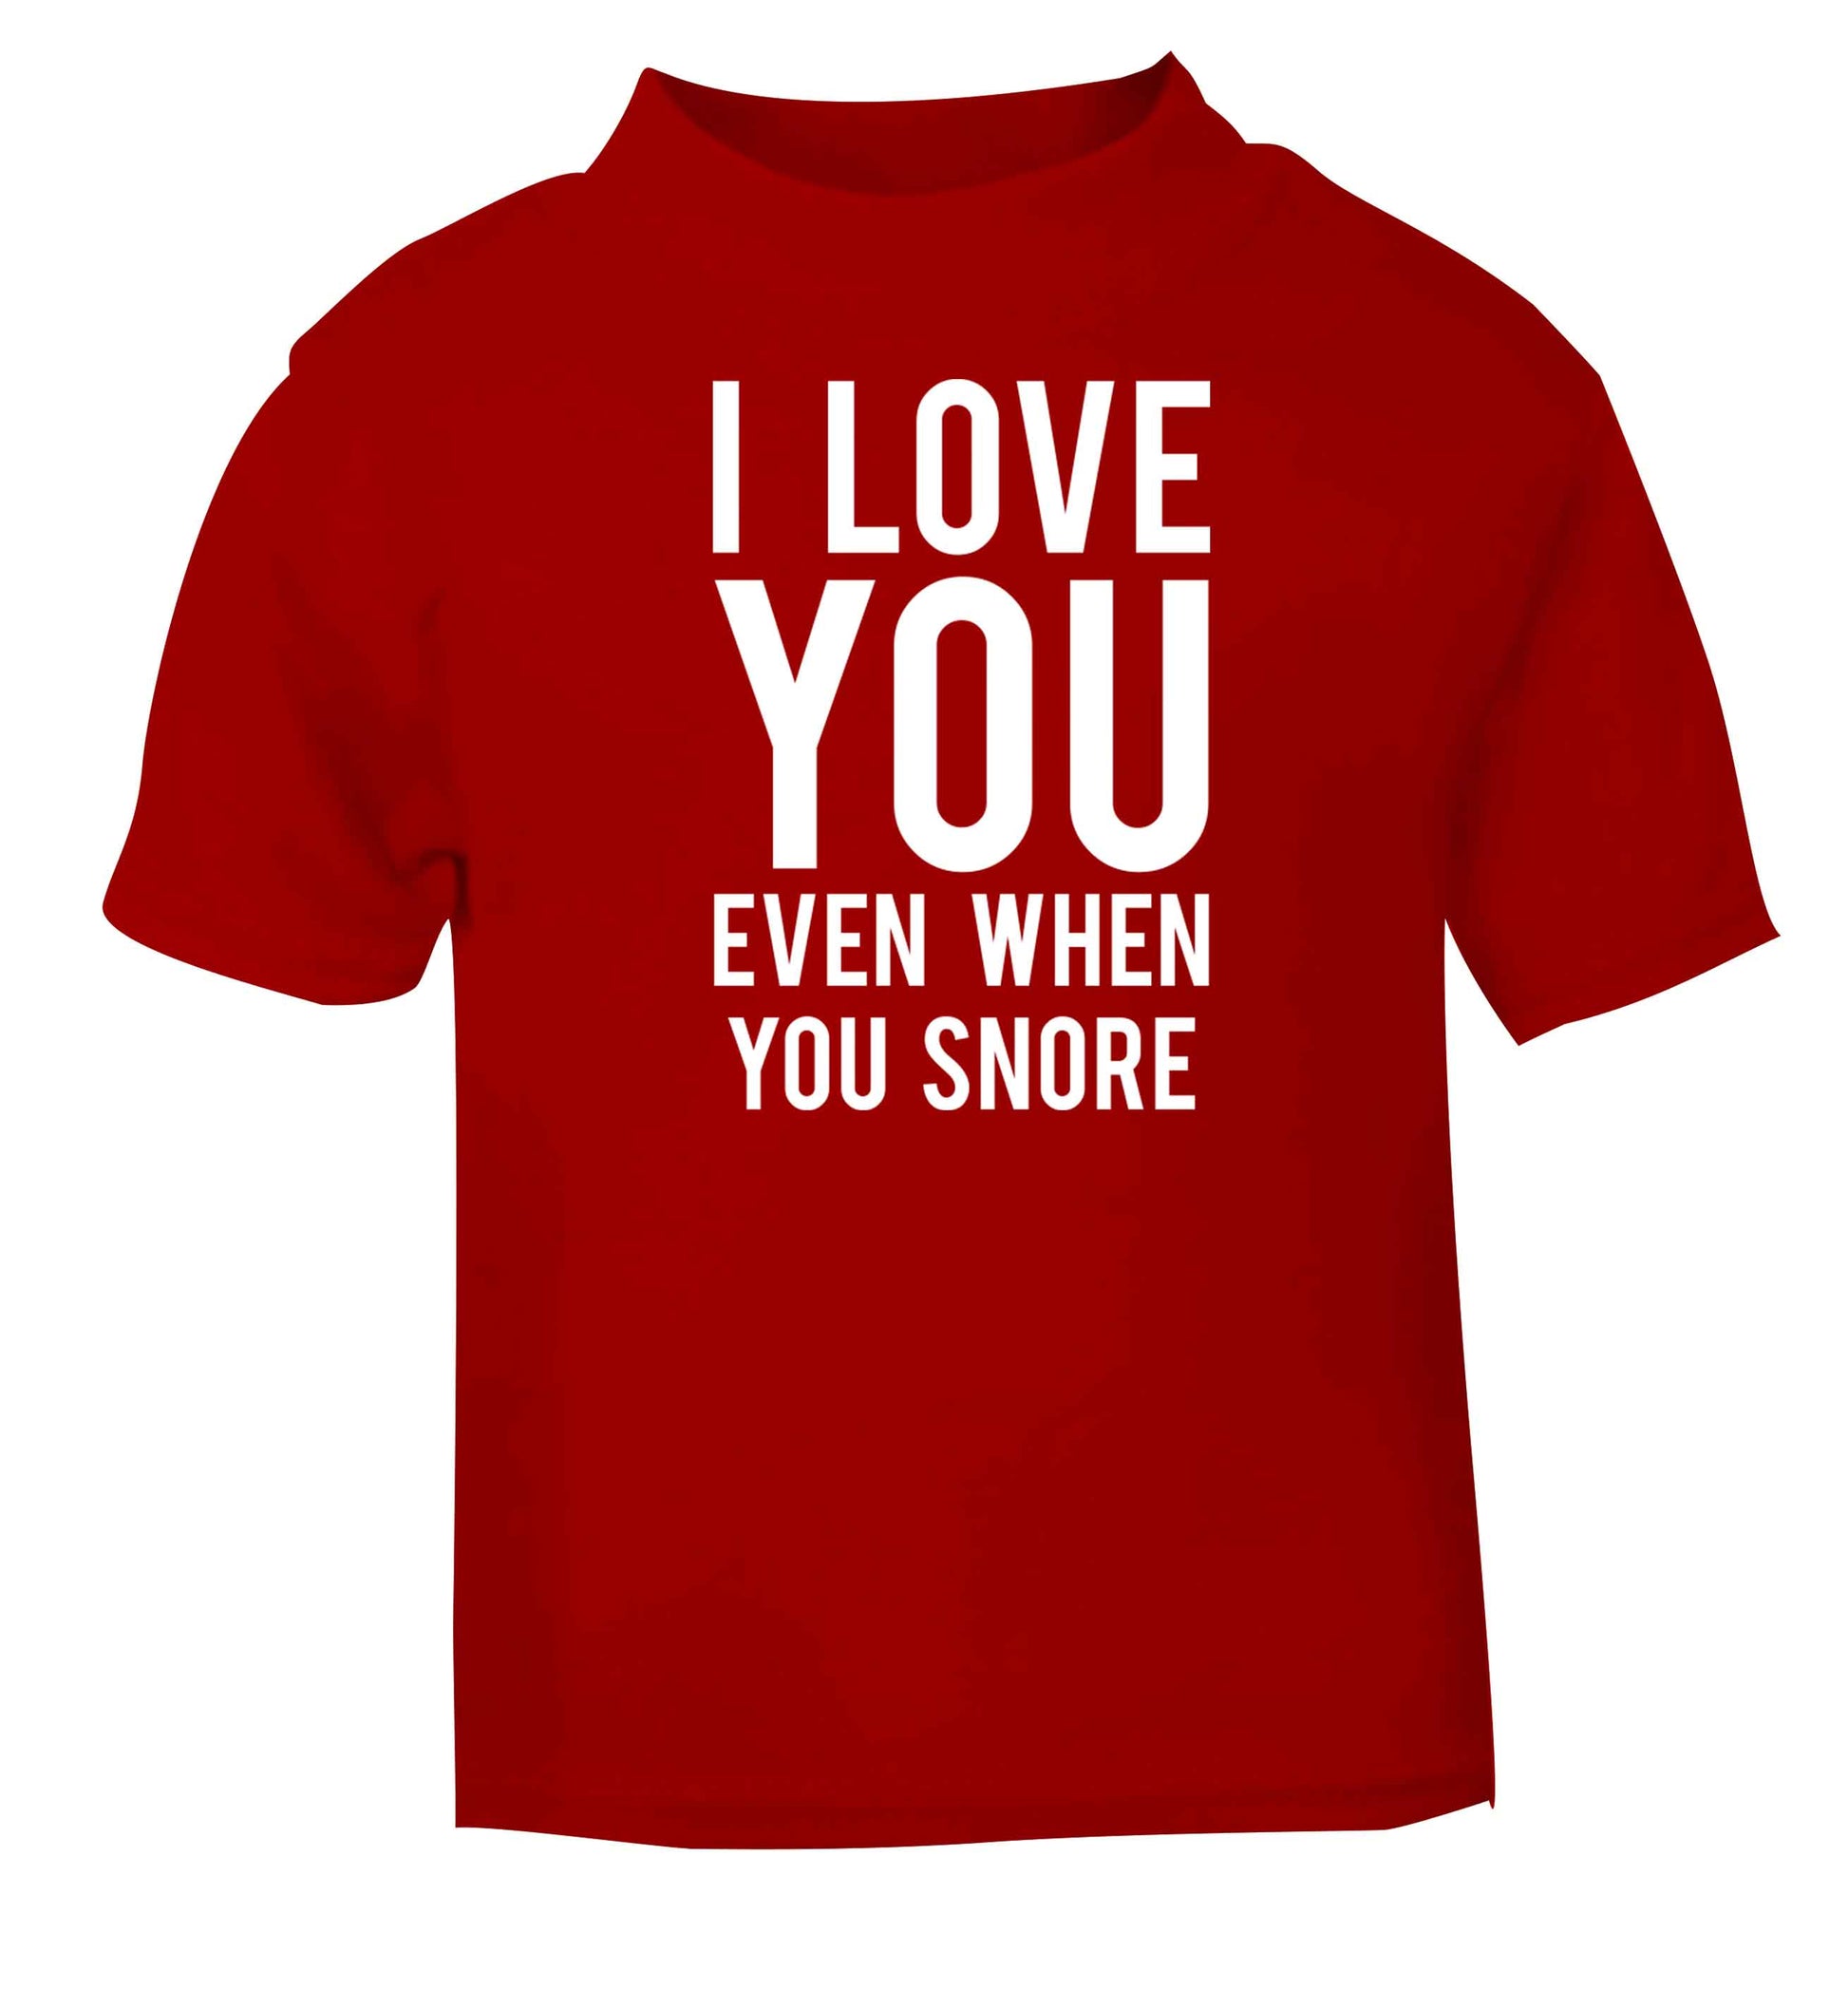 I love you even when you snore red baby toddler Tshirt 2 Years